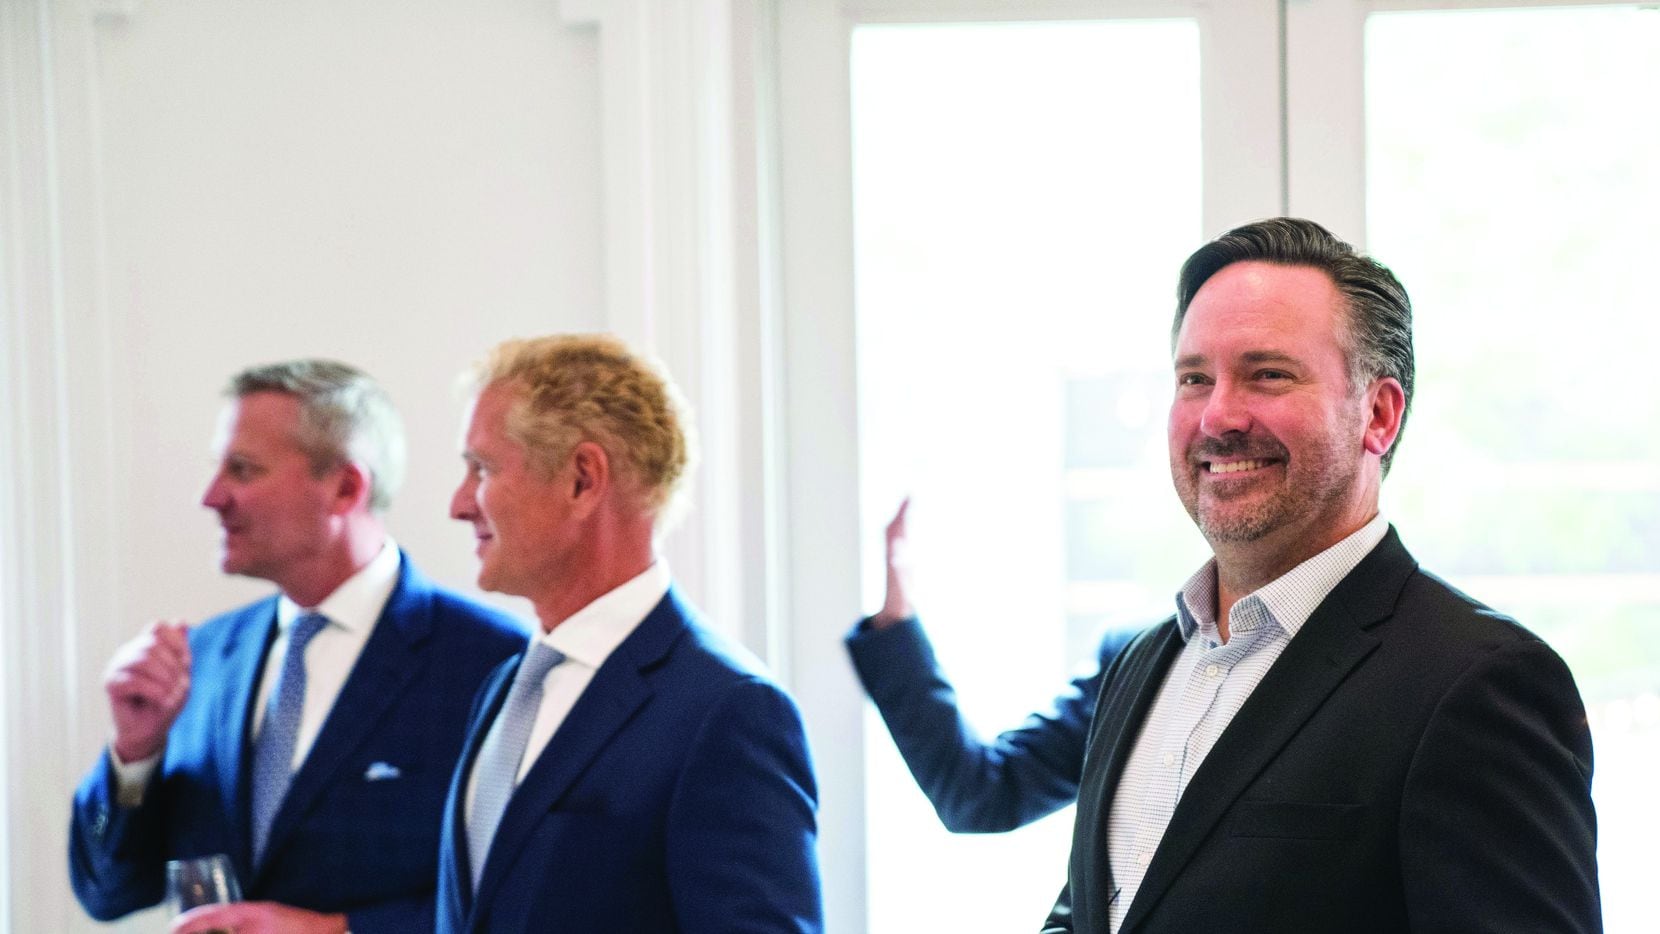 Christie’s International Real Estate, with its D/FW affiliate, ULTERRE, recently celebrated the opening of a new luxury residential and commercial real estate office in Uptown.